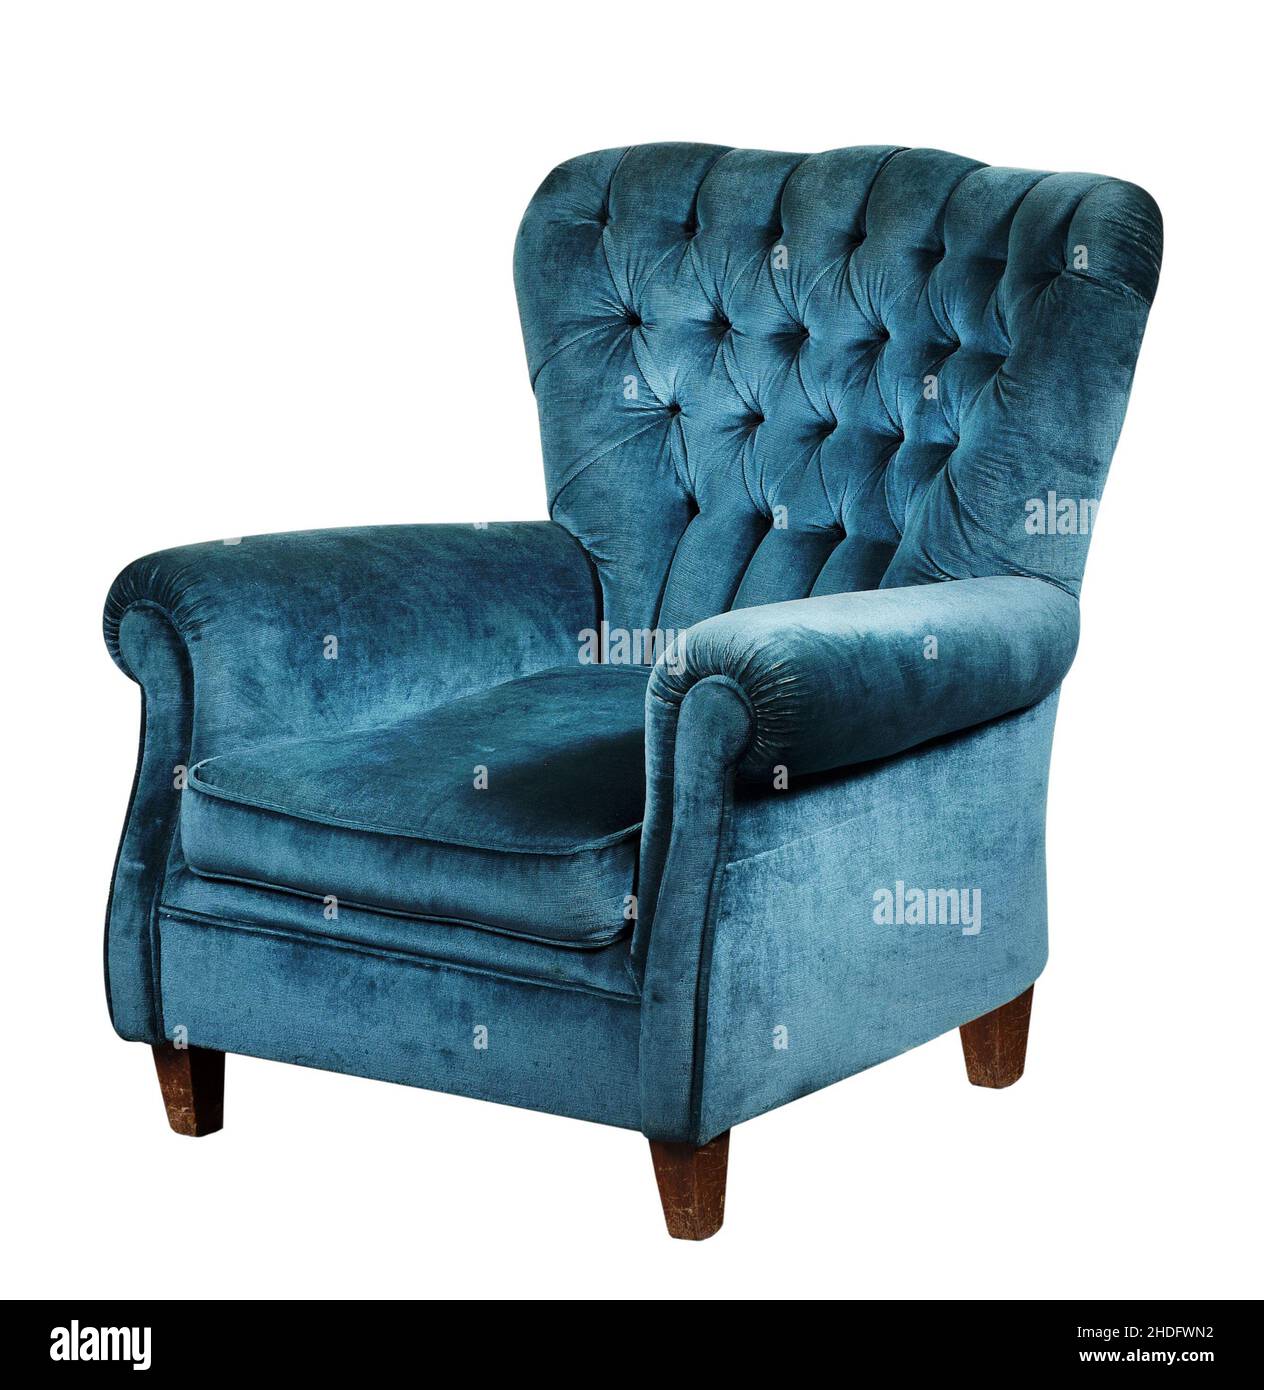 blue, armchair, vintage, chair, blues, armchairs, vintage print, vintages, chairs Stock Photo